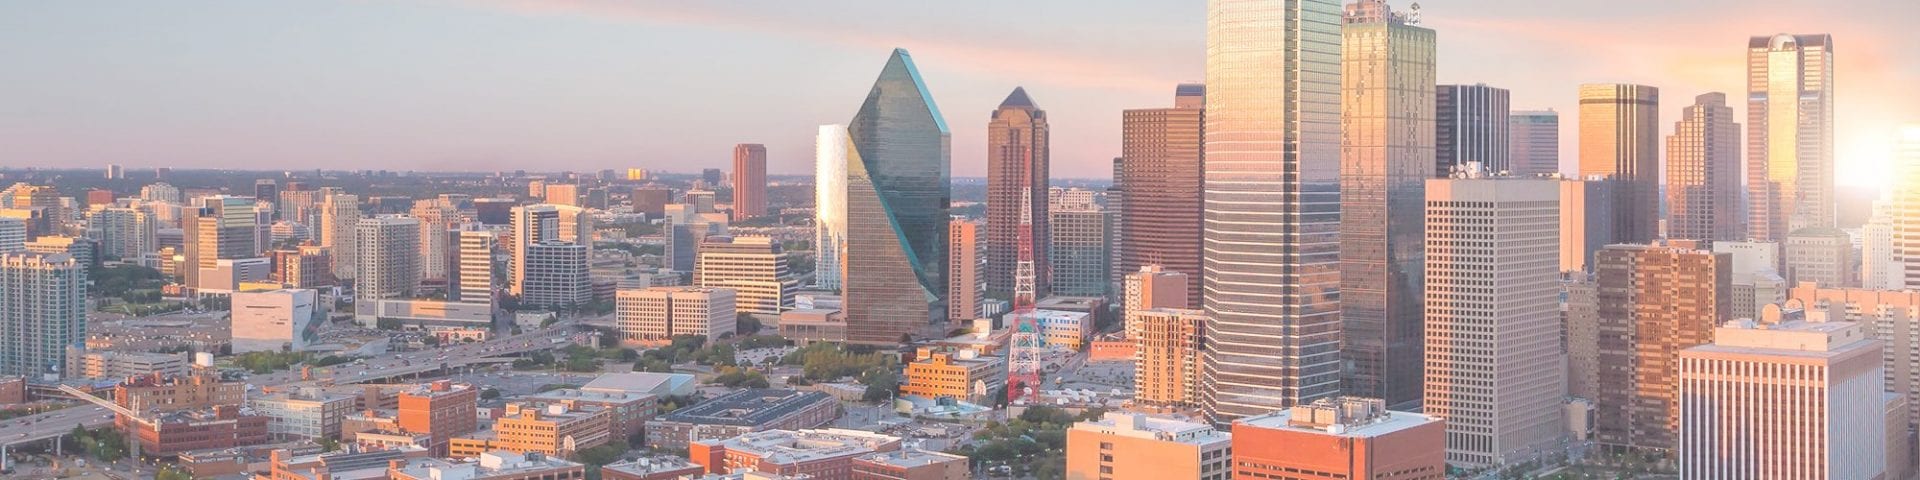 Dallas/Fort Worth Indoor Air Quality (IAQ) Surveys in High-Rise Commercial/Residential Buildings